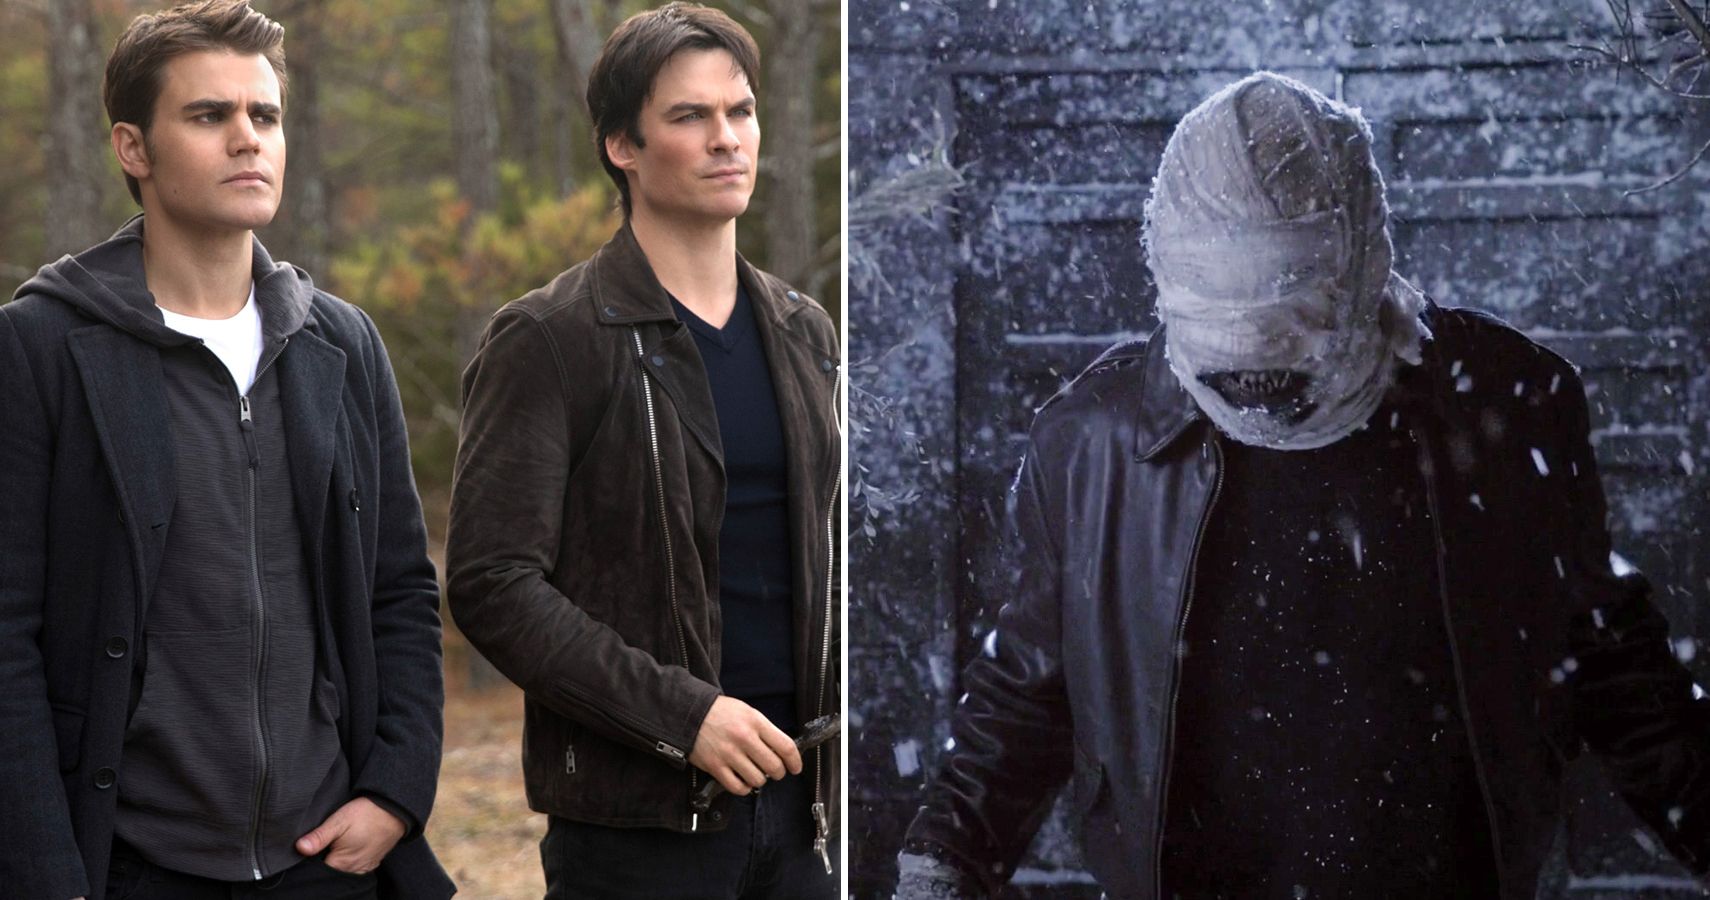 The Vampire Diaries 5 Teen Wolf Villains The Salvatores Could Defeat (& 5 They Definitely Couldn’t)